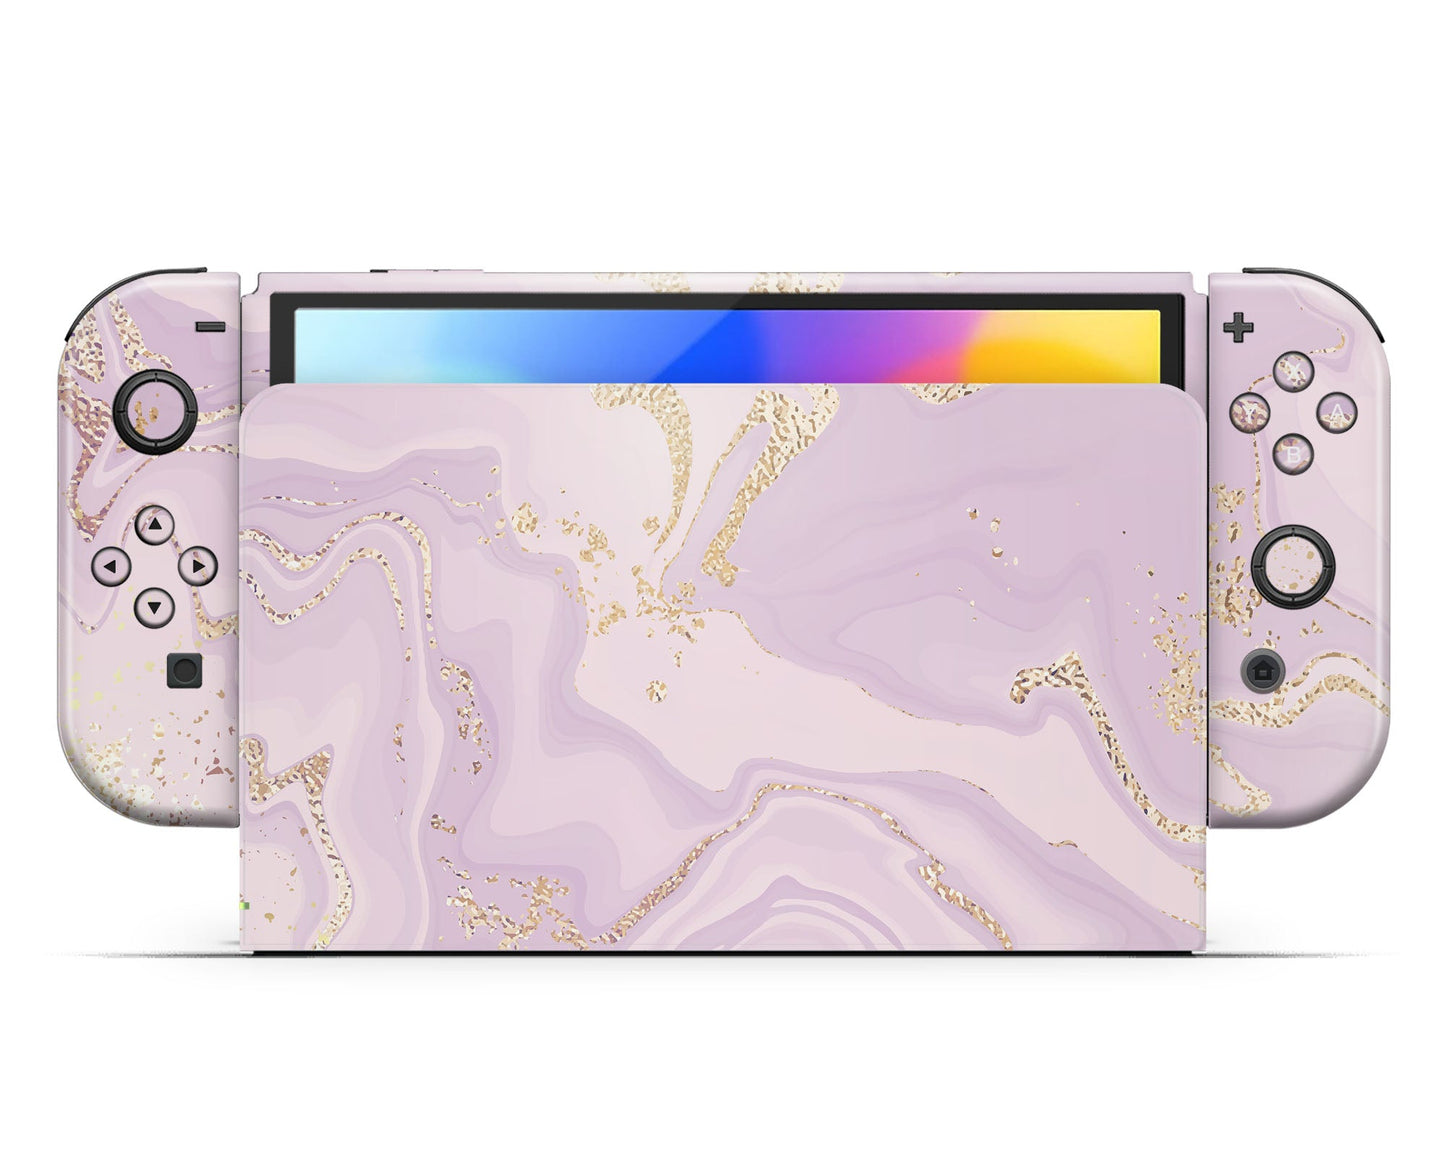 Lux Skins Nintendo Switch OLED Ethereal Lavender Marble Joycons Only Skins - Pattern Marble Skin